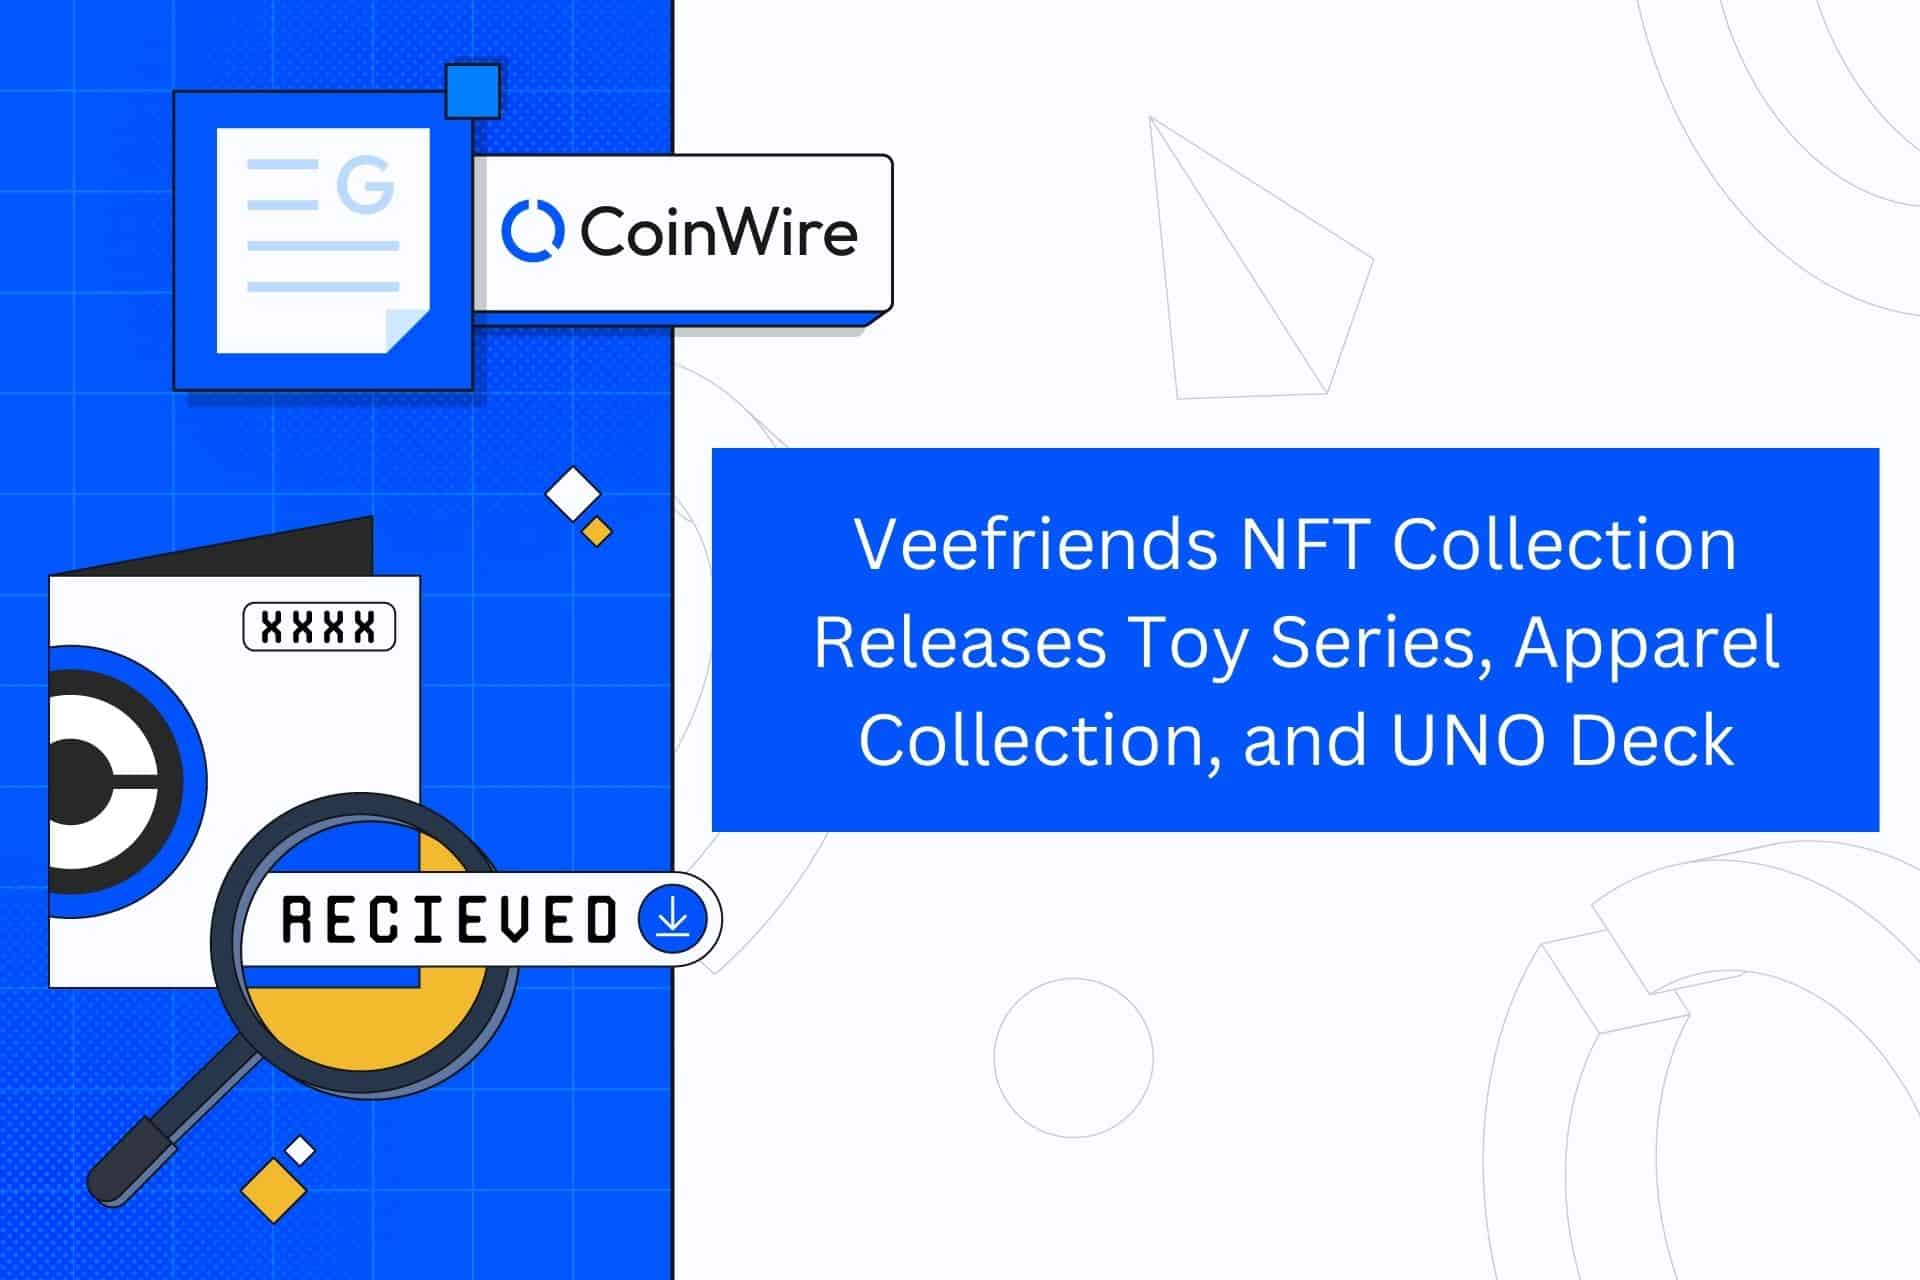 Veefriends Nft Collection Releases Toy Series, Apparel Collection, And Uno Deck